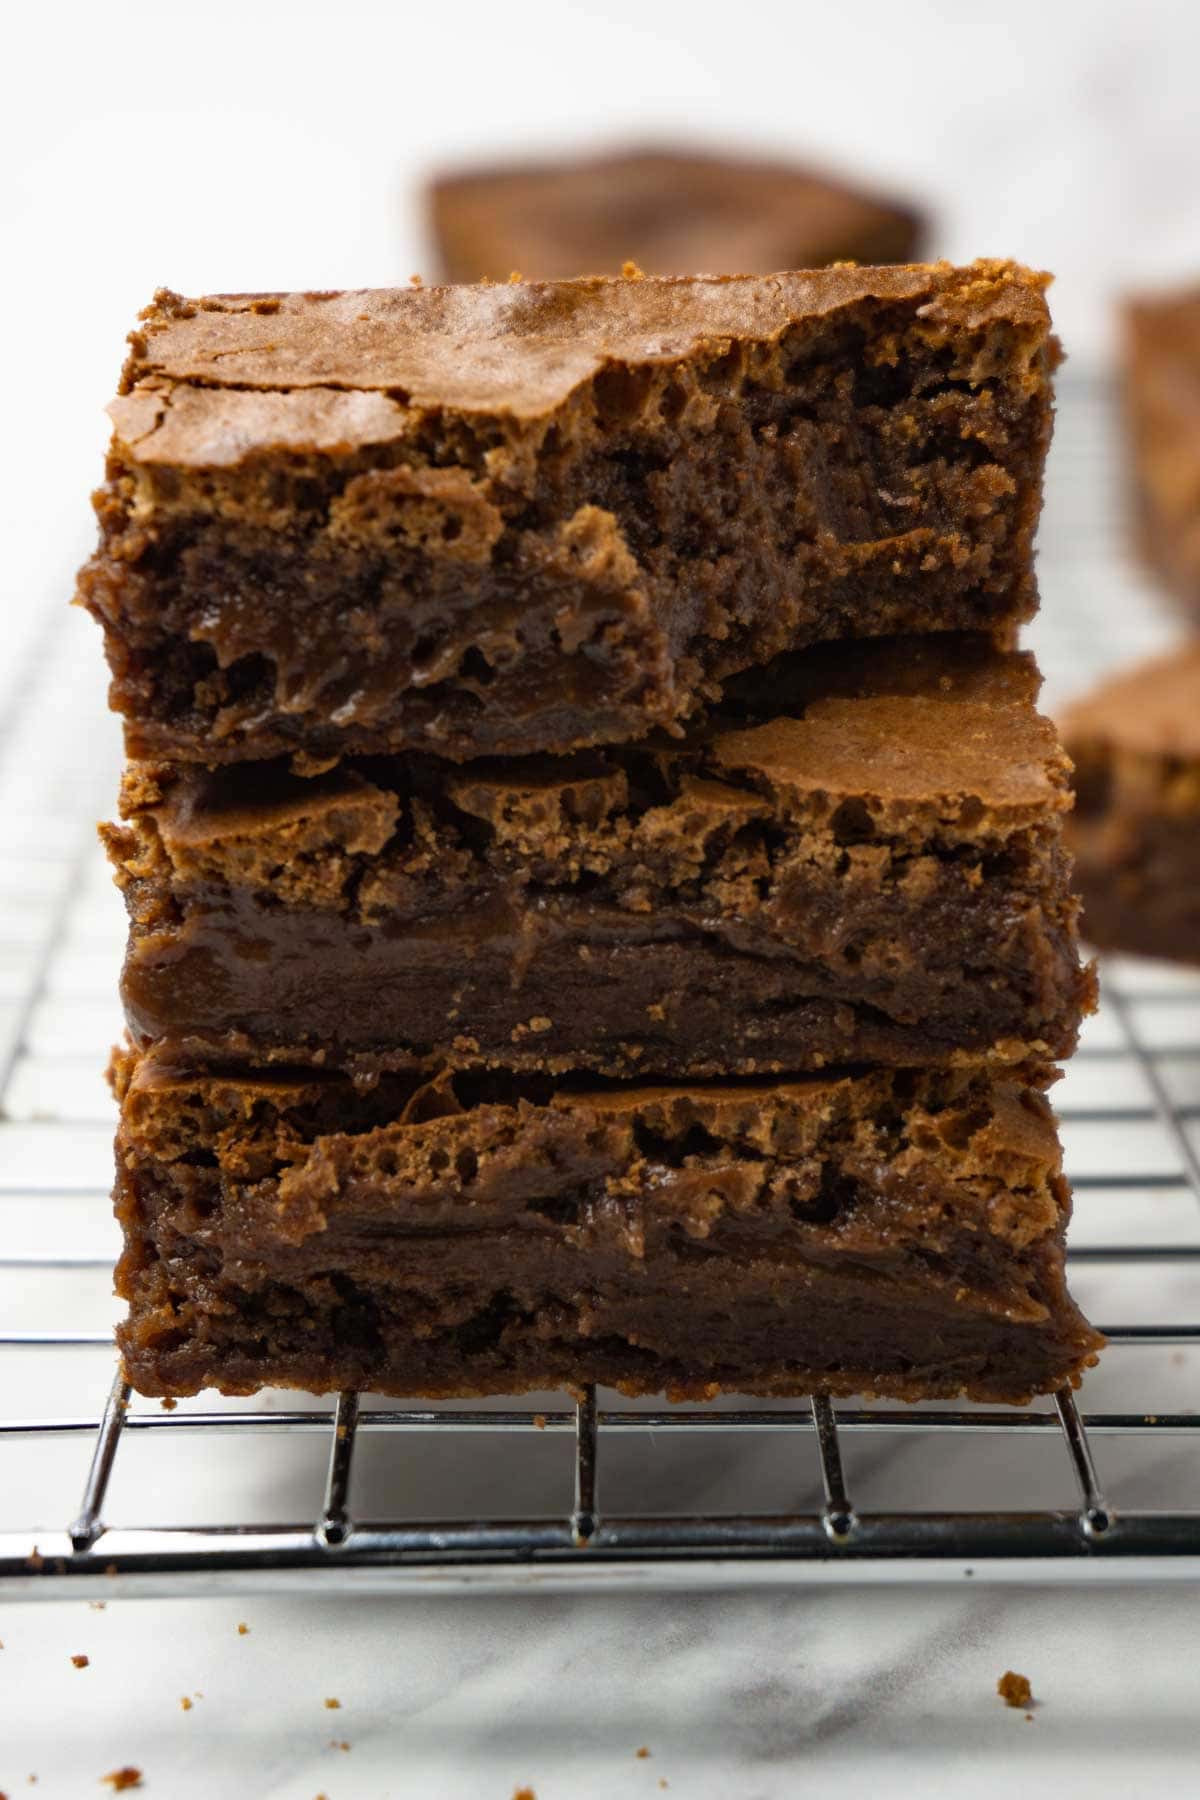 Three brownies stacked on top of each other, one bite taken from the top one.